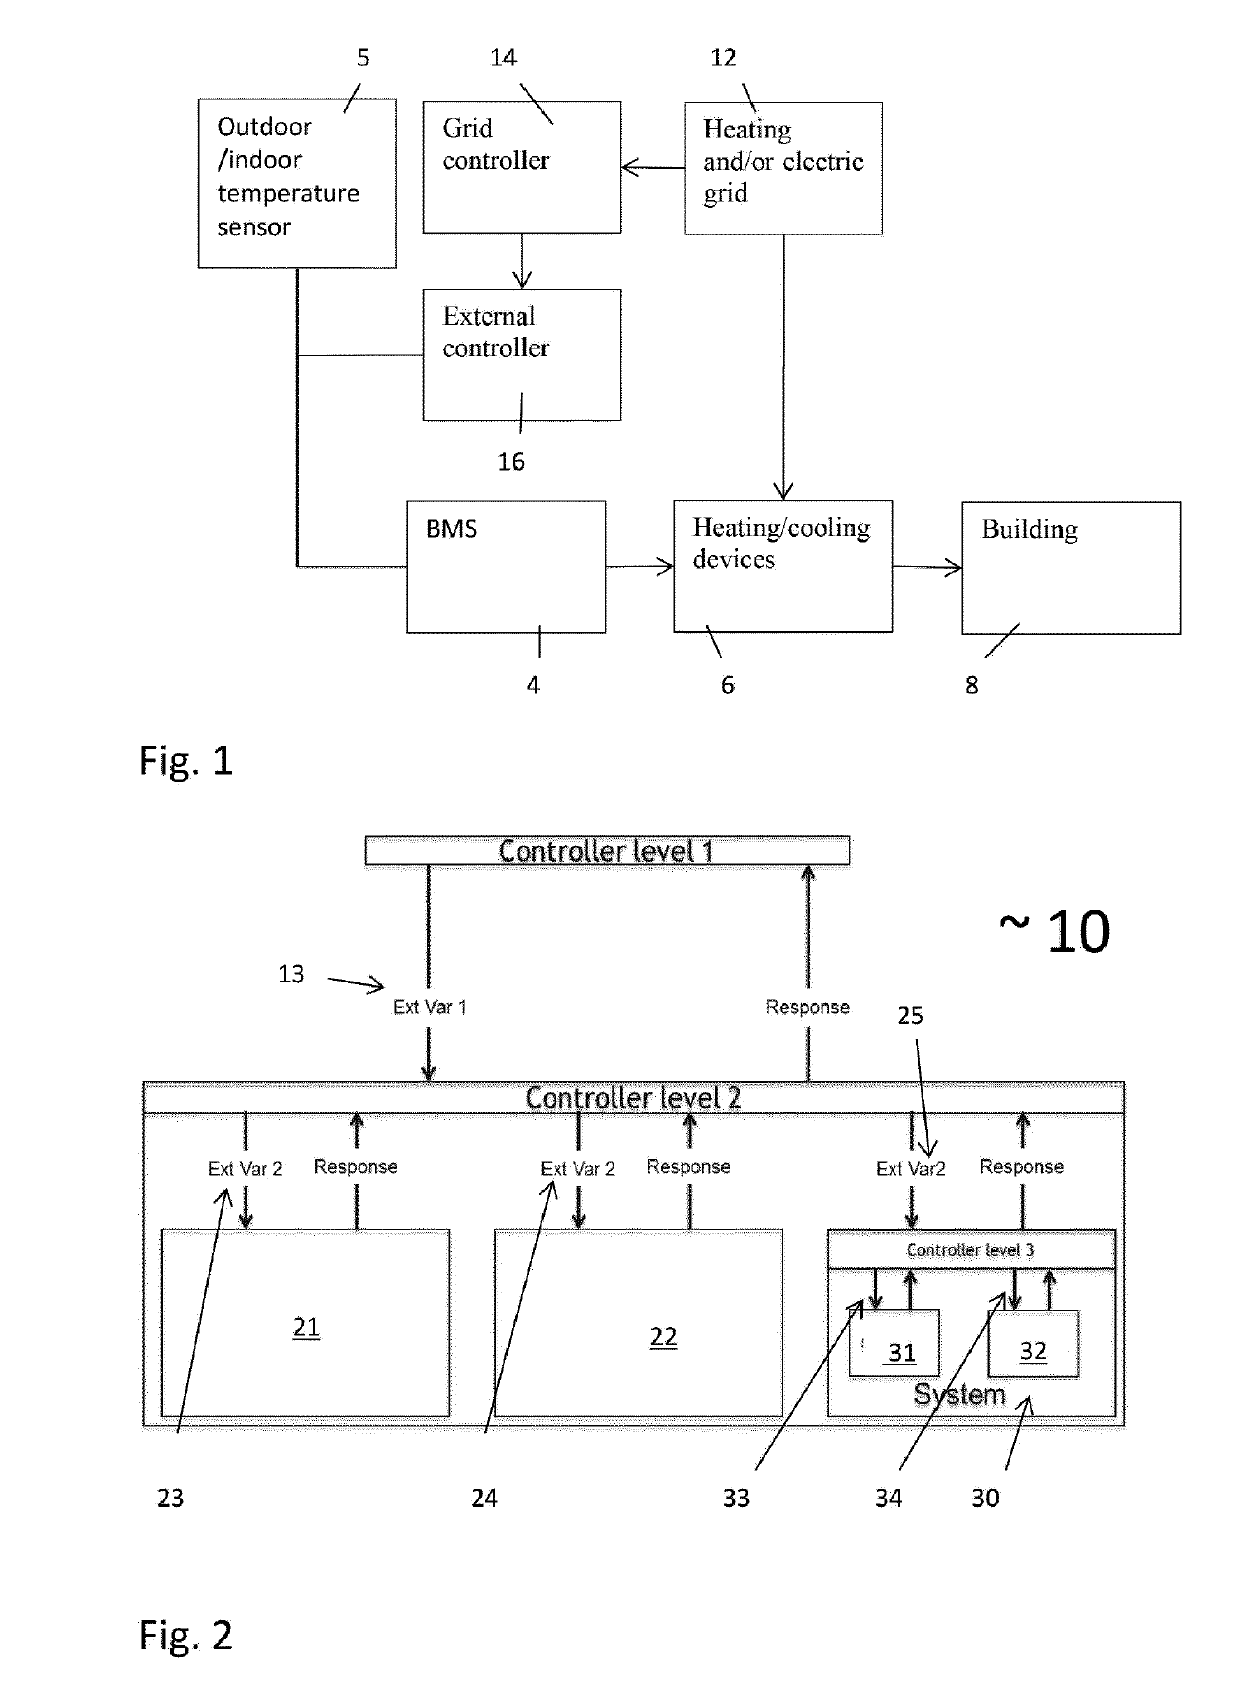 Hierarchical implicit controller for shielded system in a grid